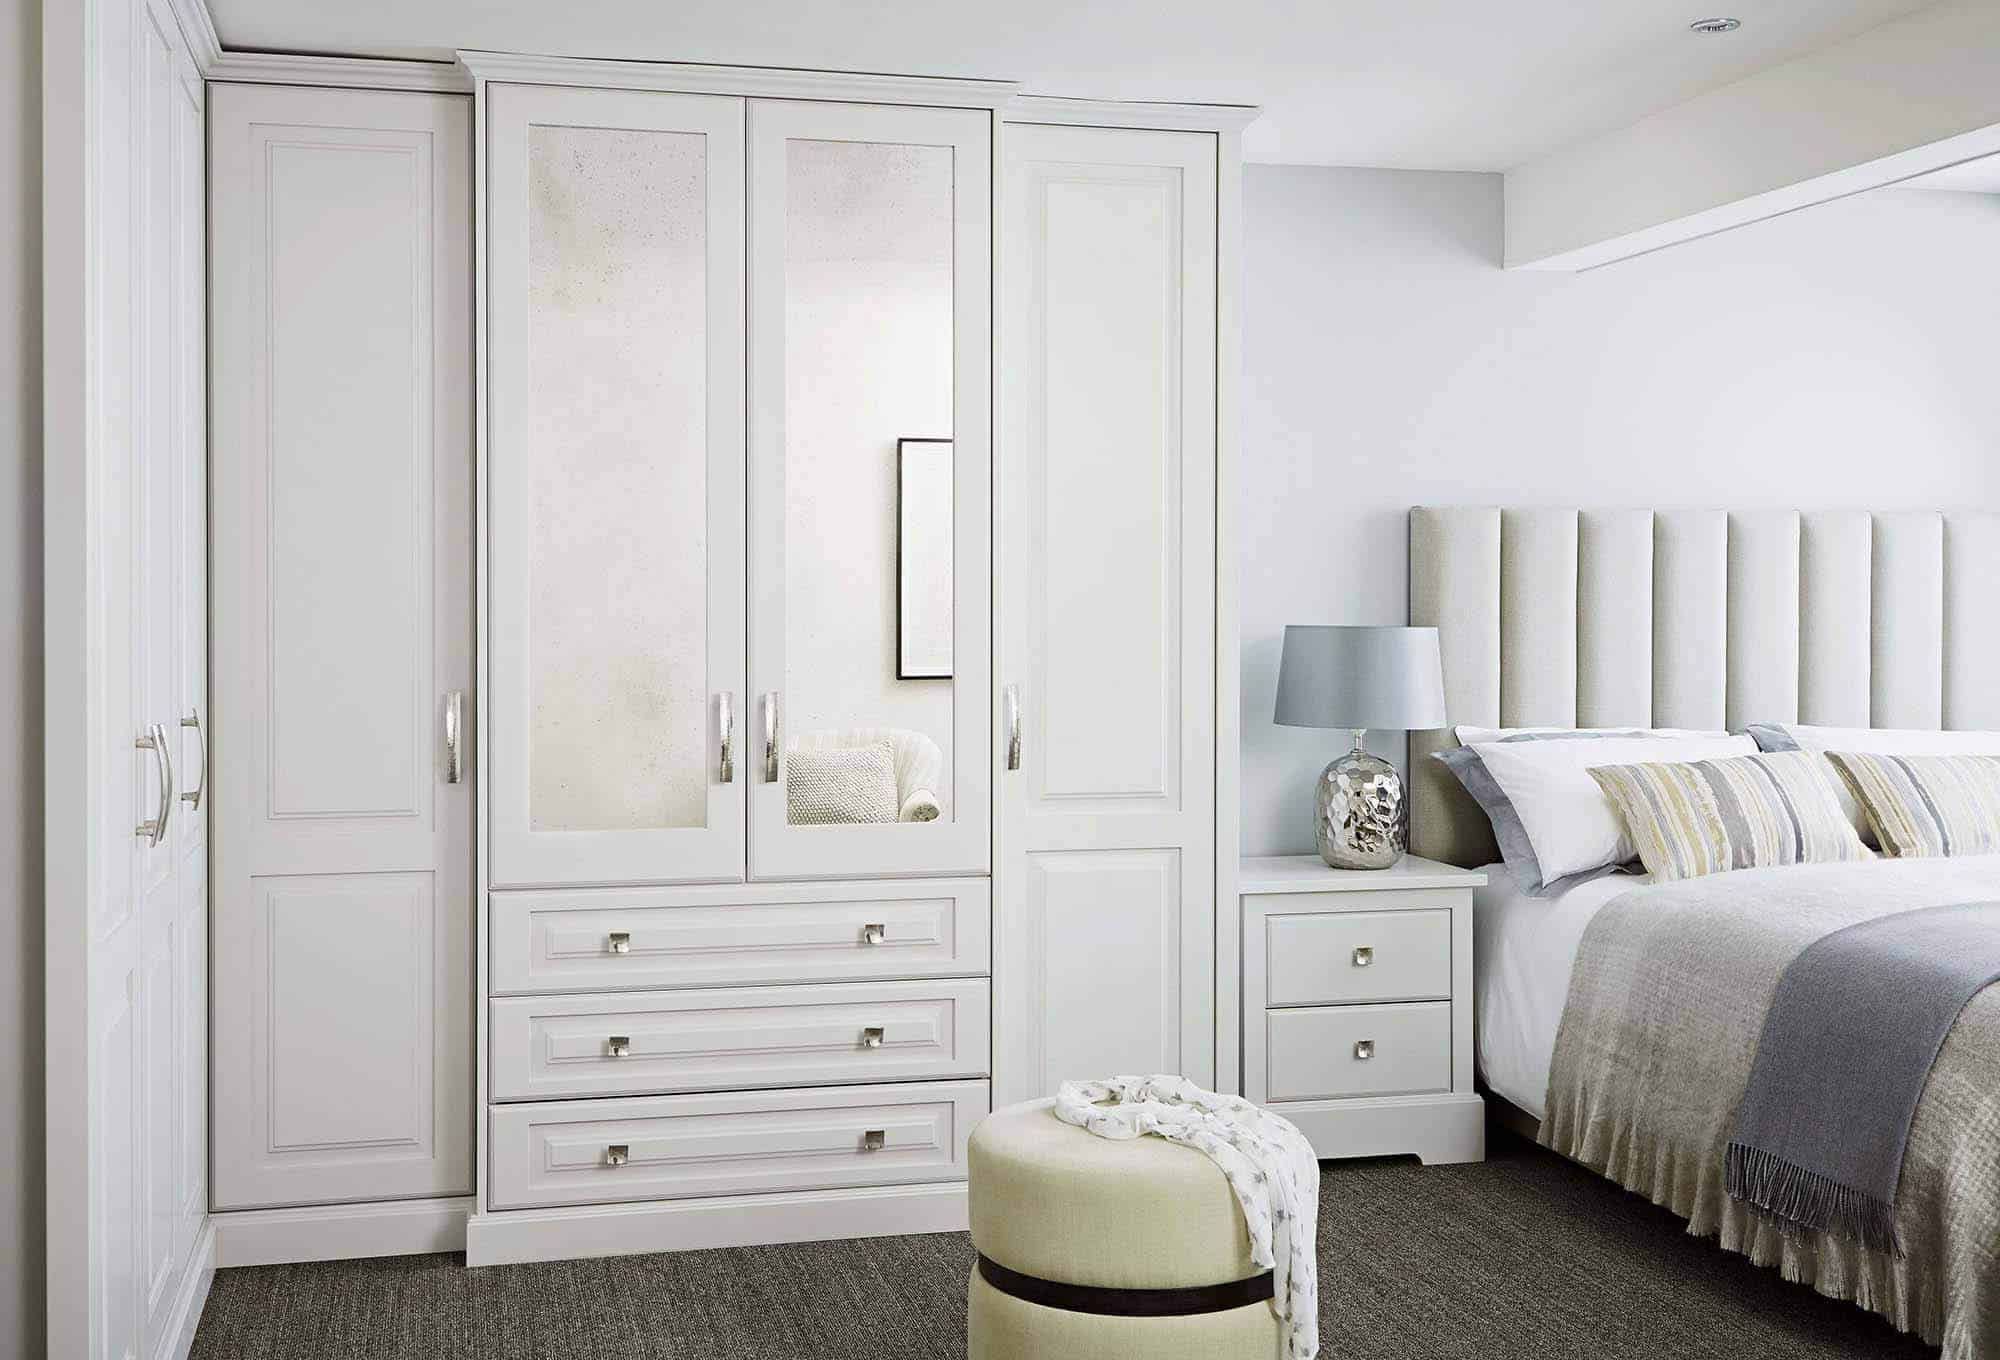 Traditional Bedroom Furniture | John Lewis Of Hungerford Regarding Traditional Wardrobes (Gallery 1 of 20)